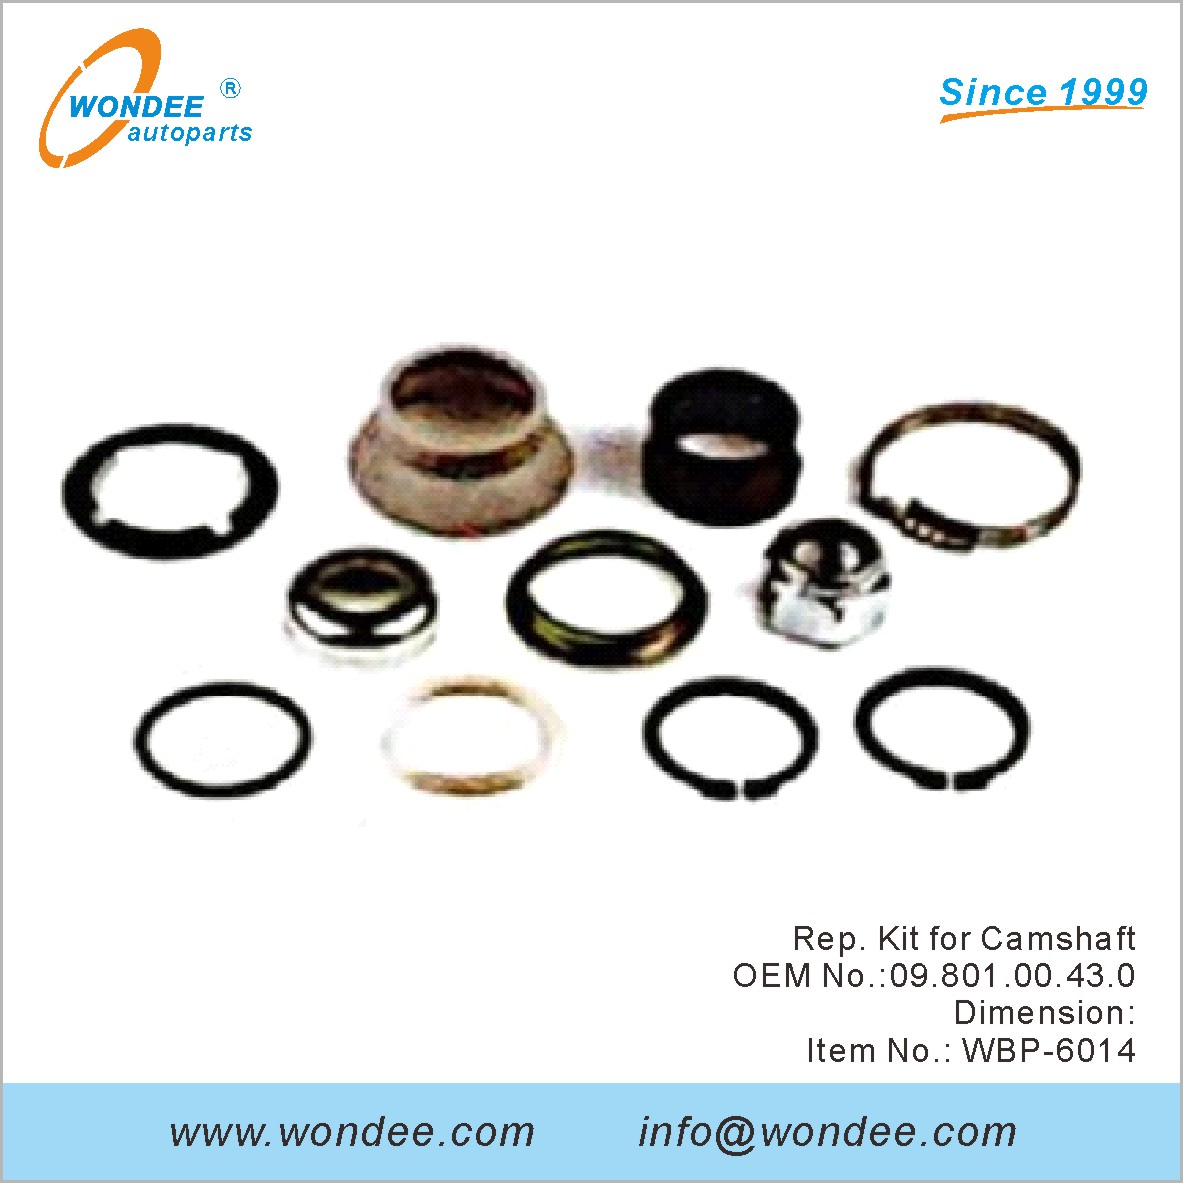 Rep Kit for Camshaft OEM 0980100430 for BPW from WONDEE